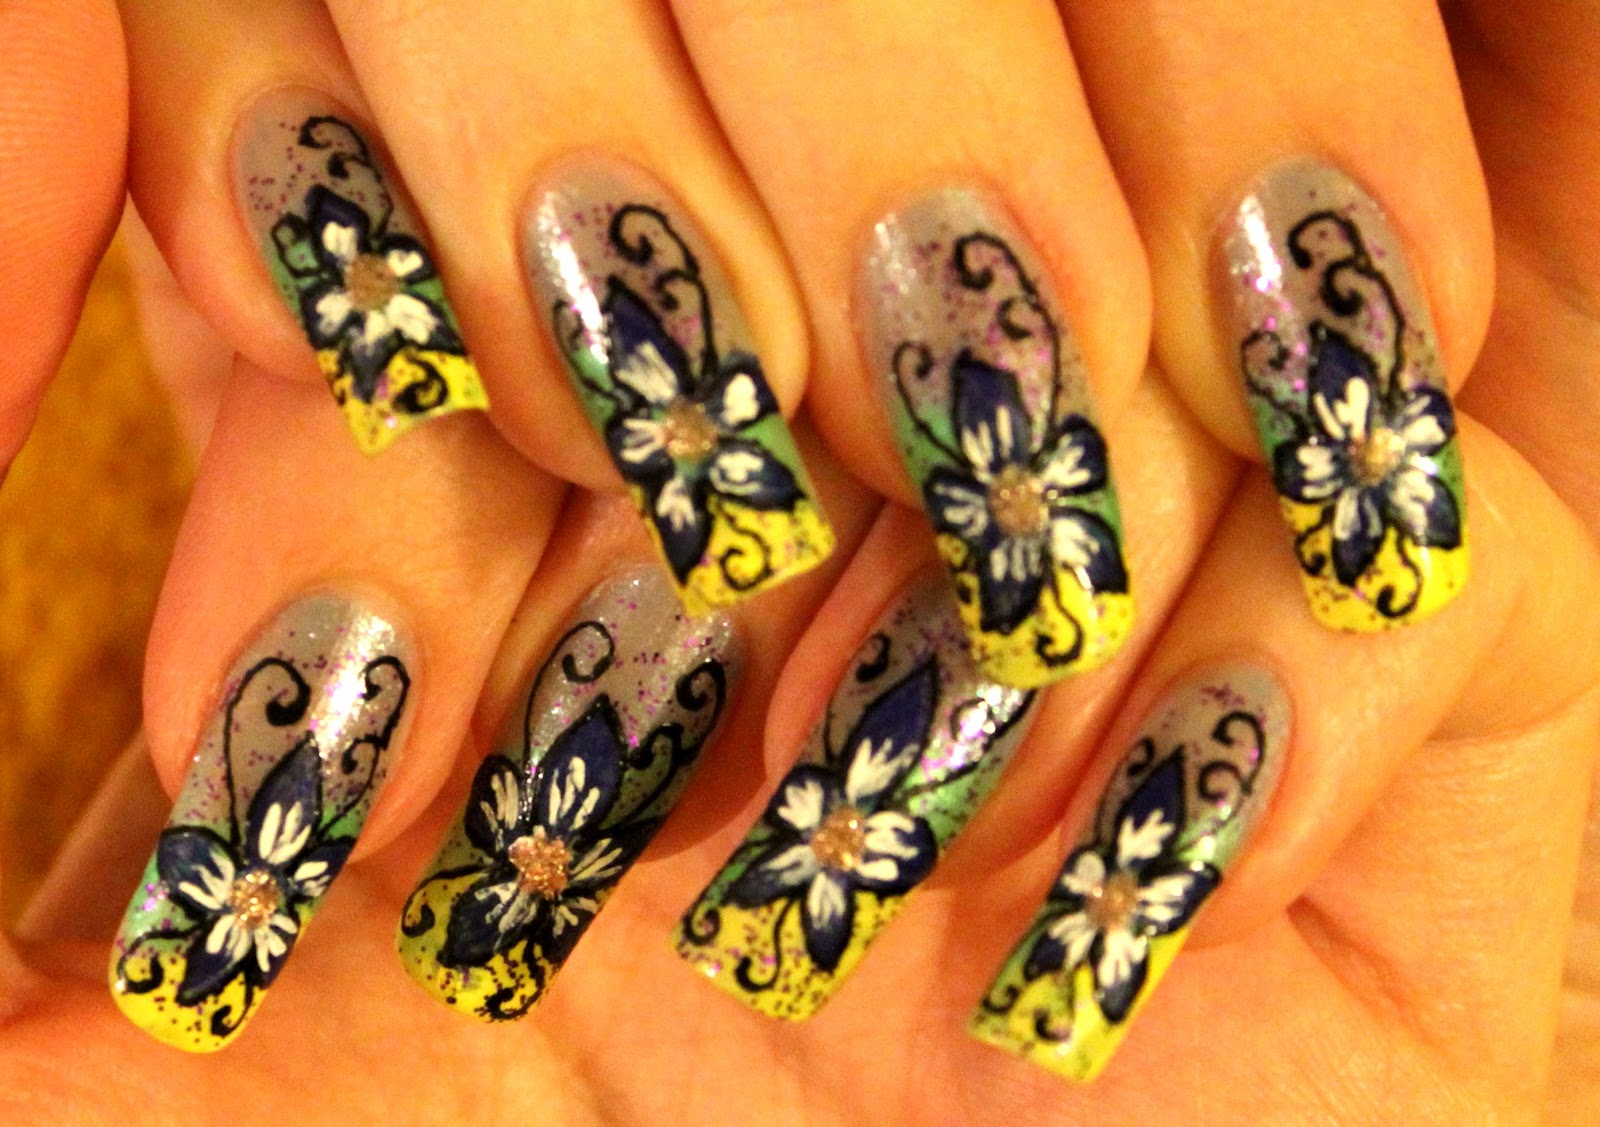 1. Floral Nail Art Themes - wide 3